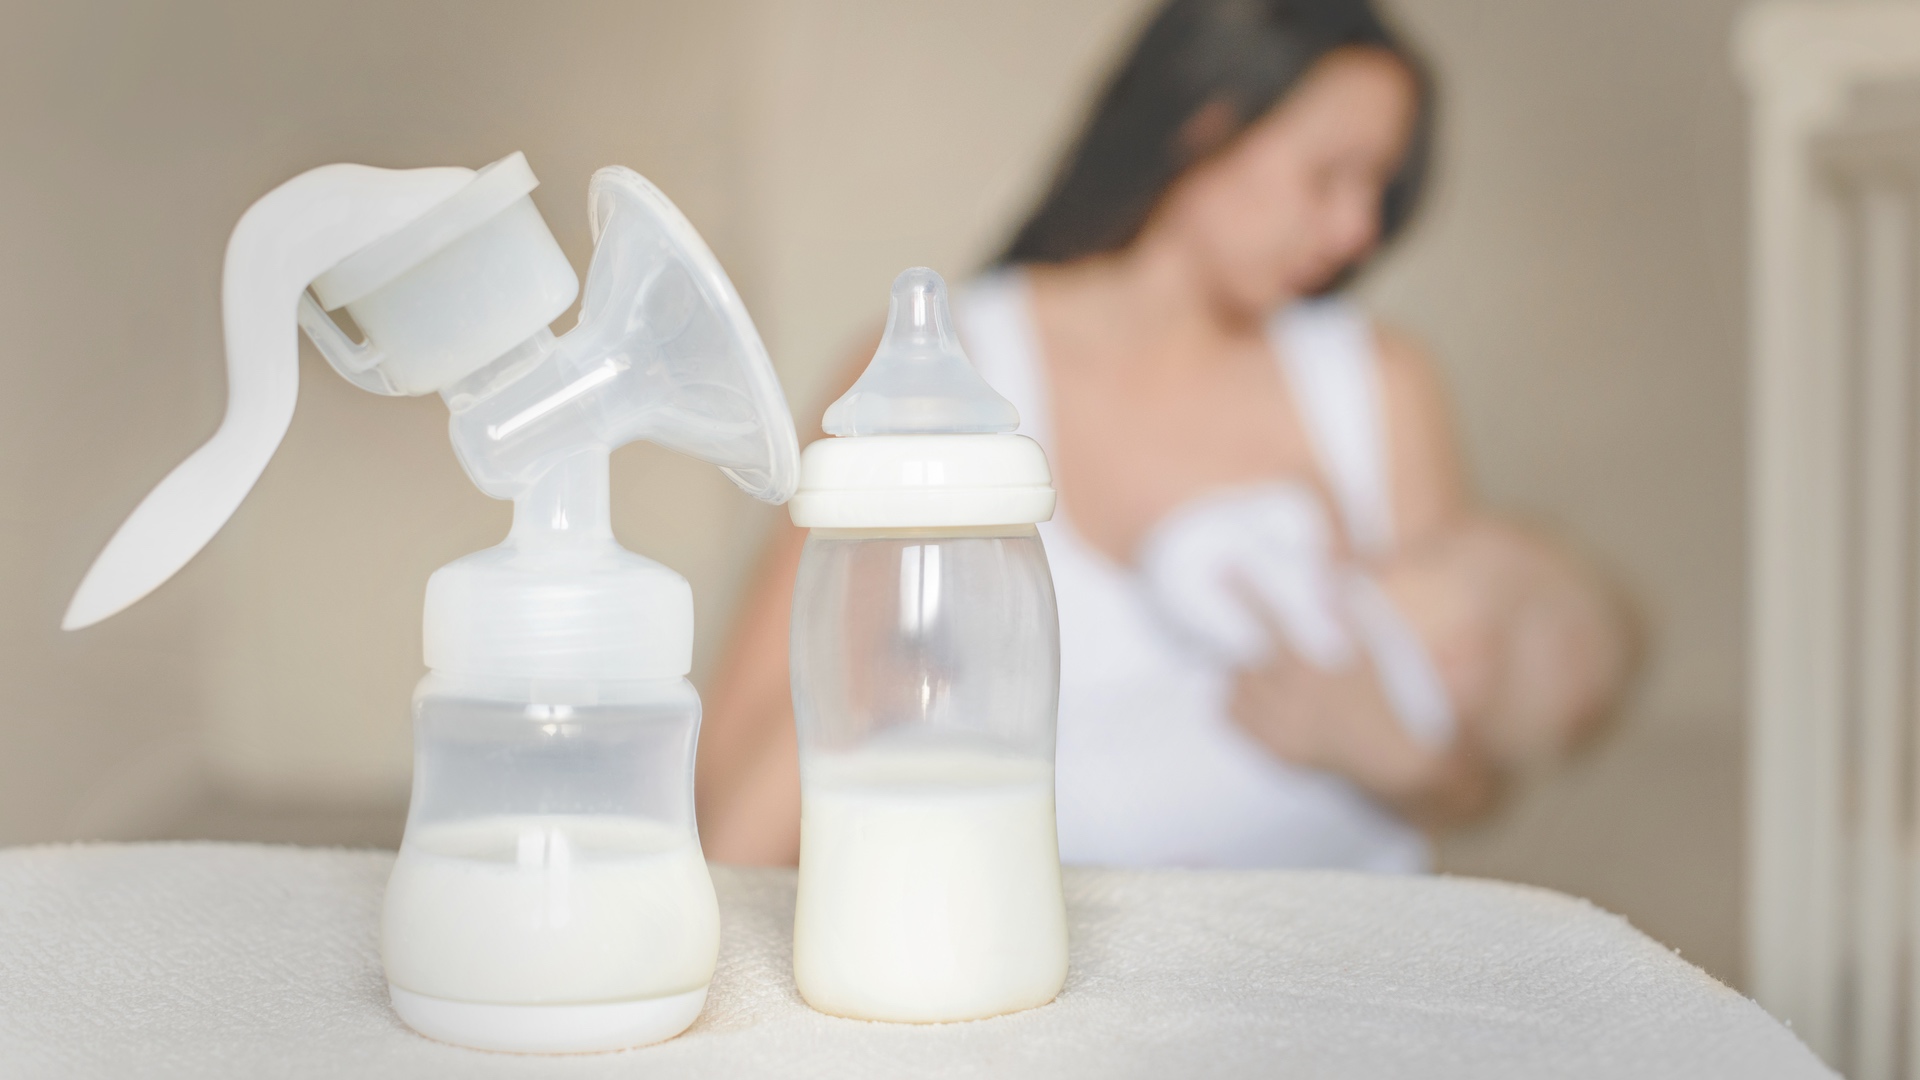 Breast Milk Oversupply: What to Do When You Have Too Much